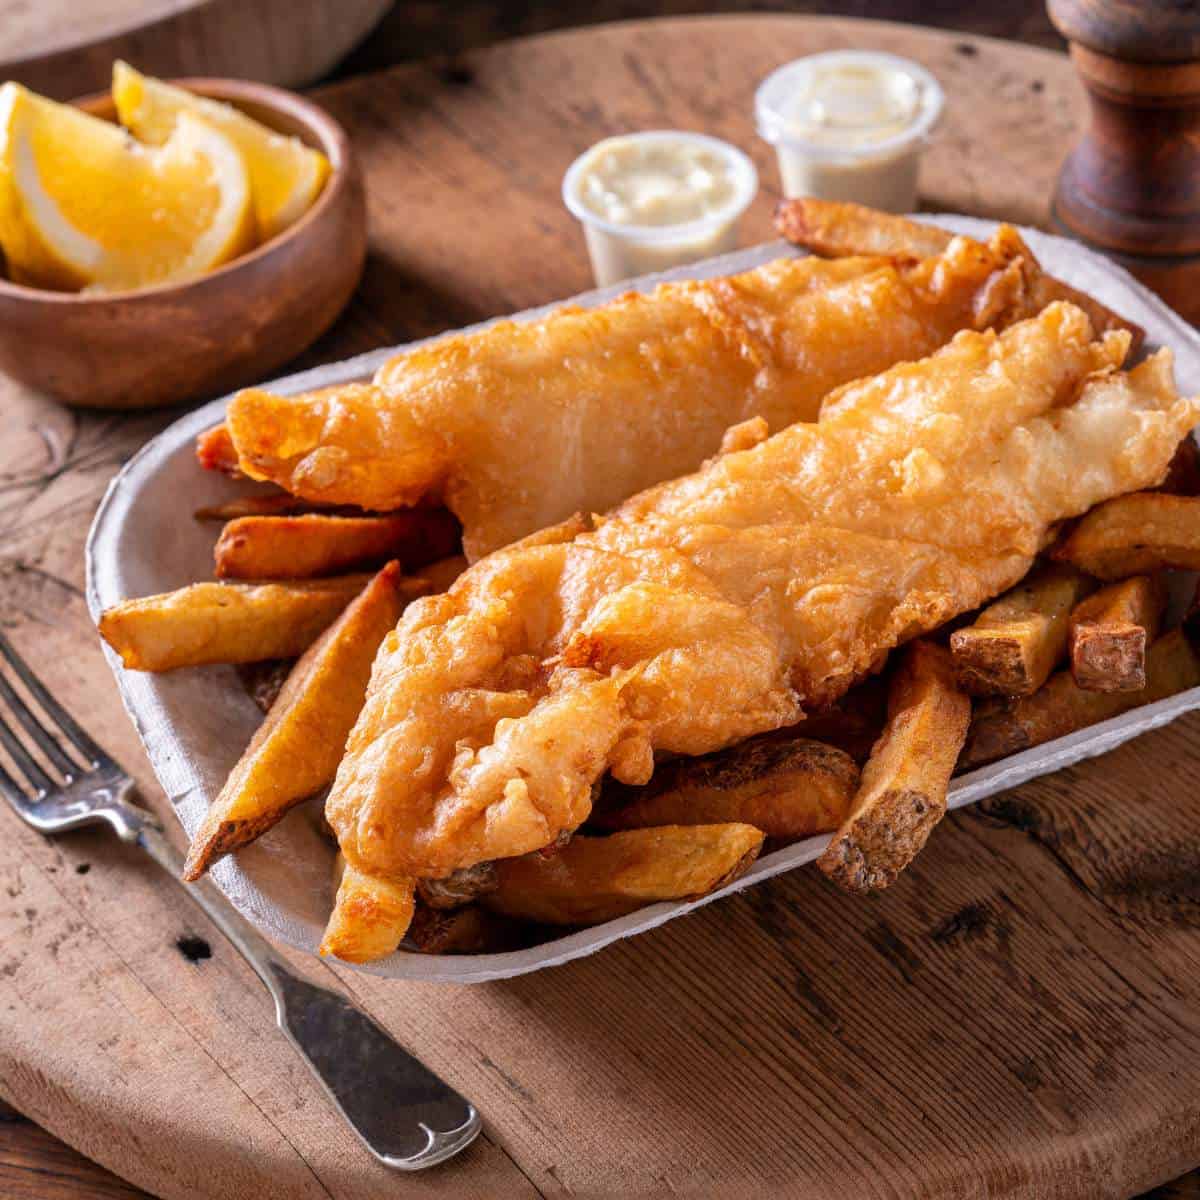 A tray of fish and chips on a wooden table.